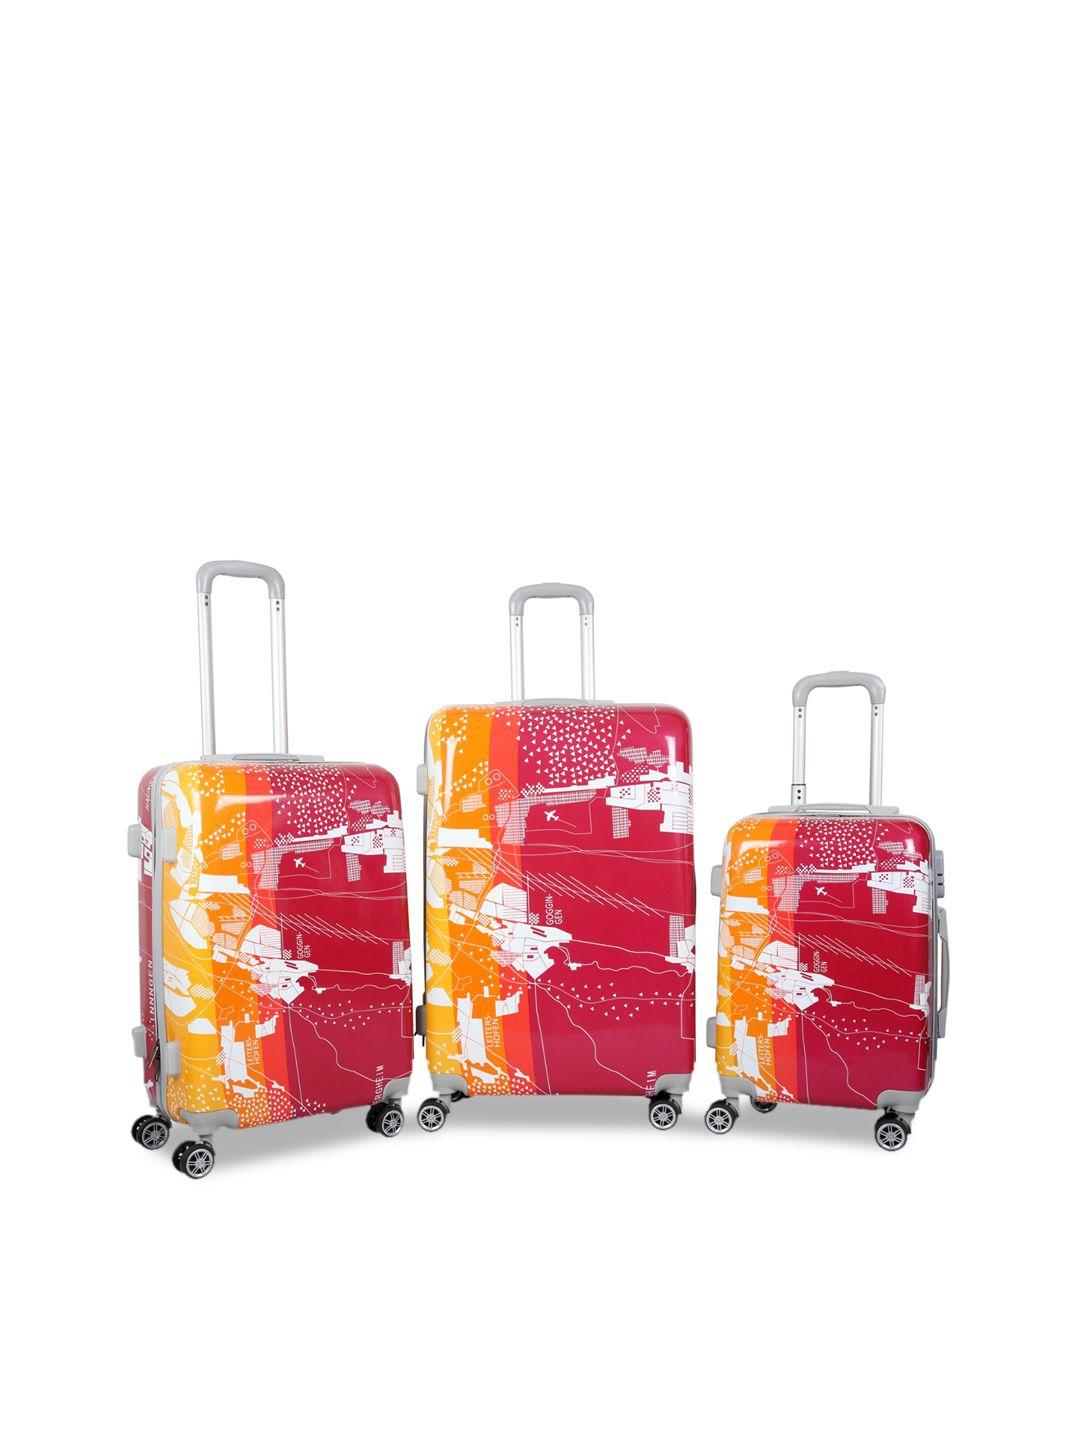 polo class unisex 3 pcs red hard luggage trolley bags